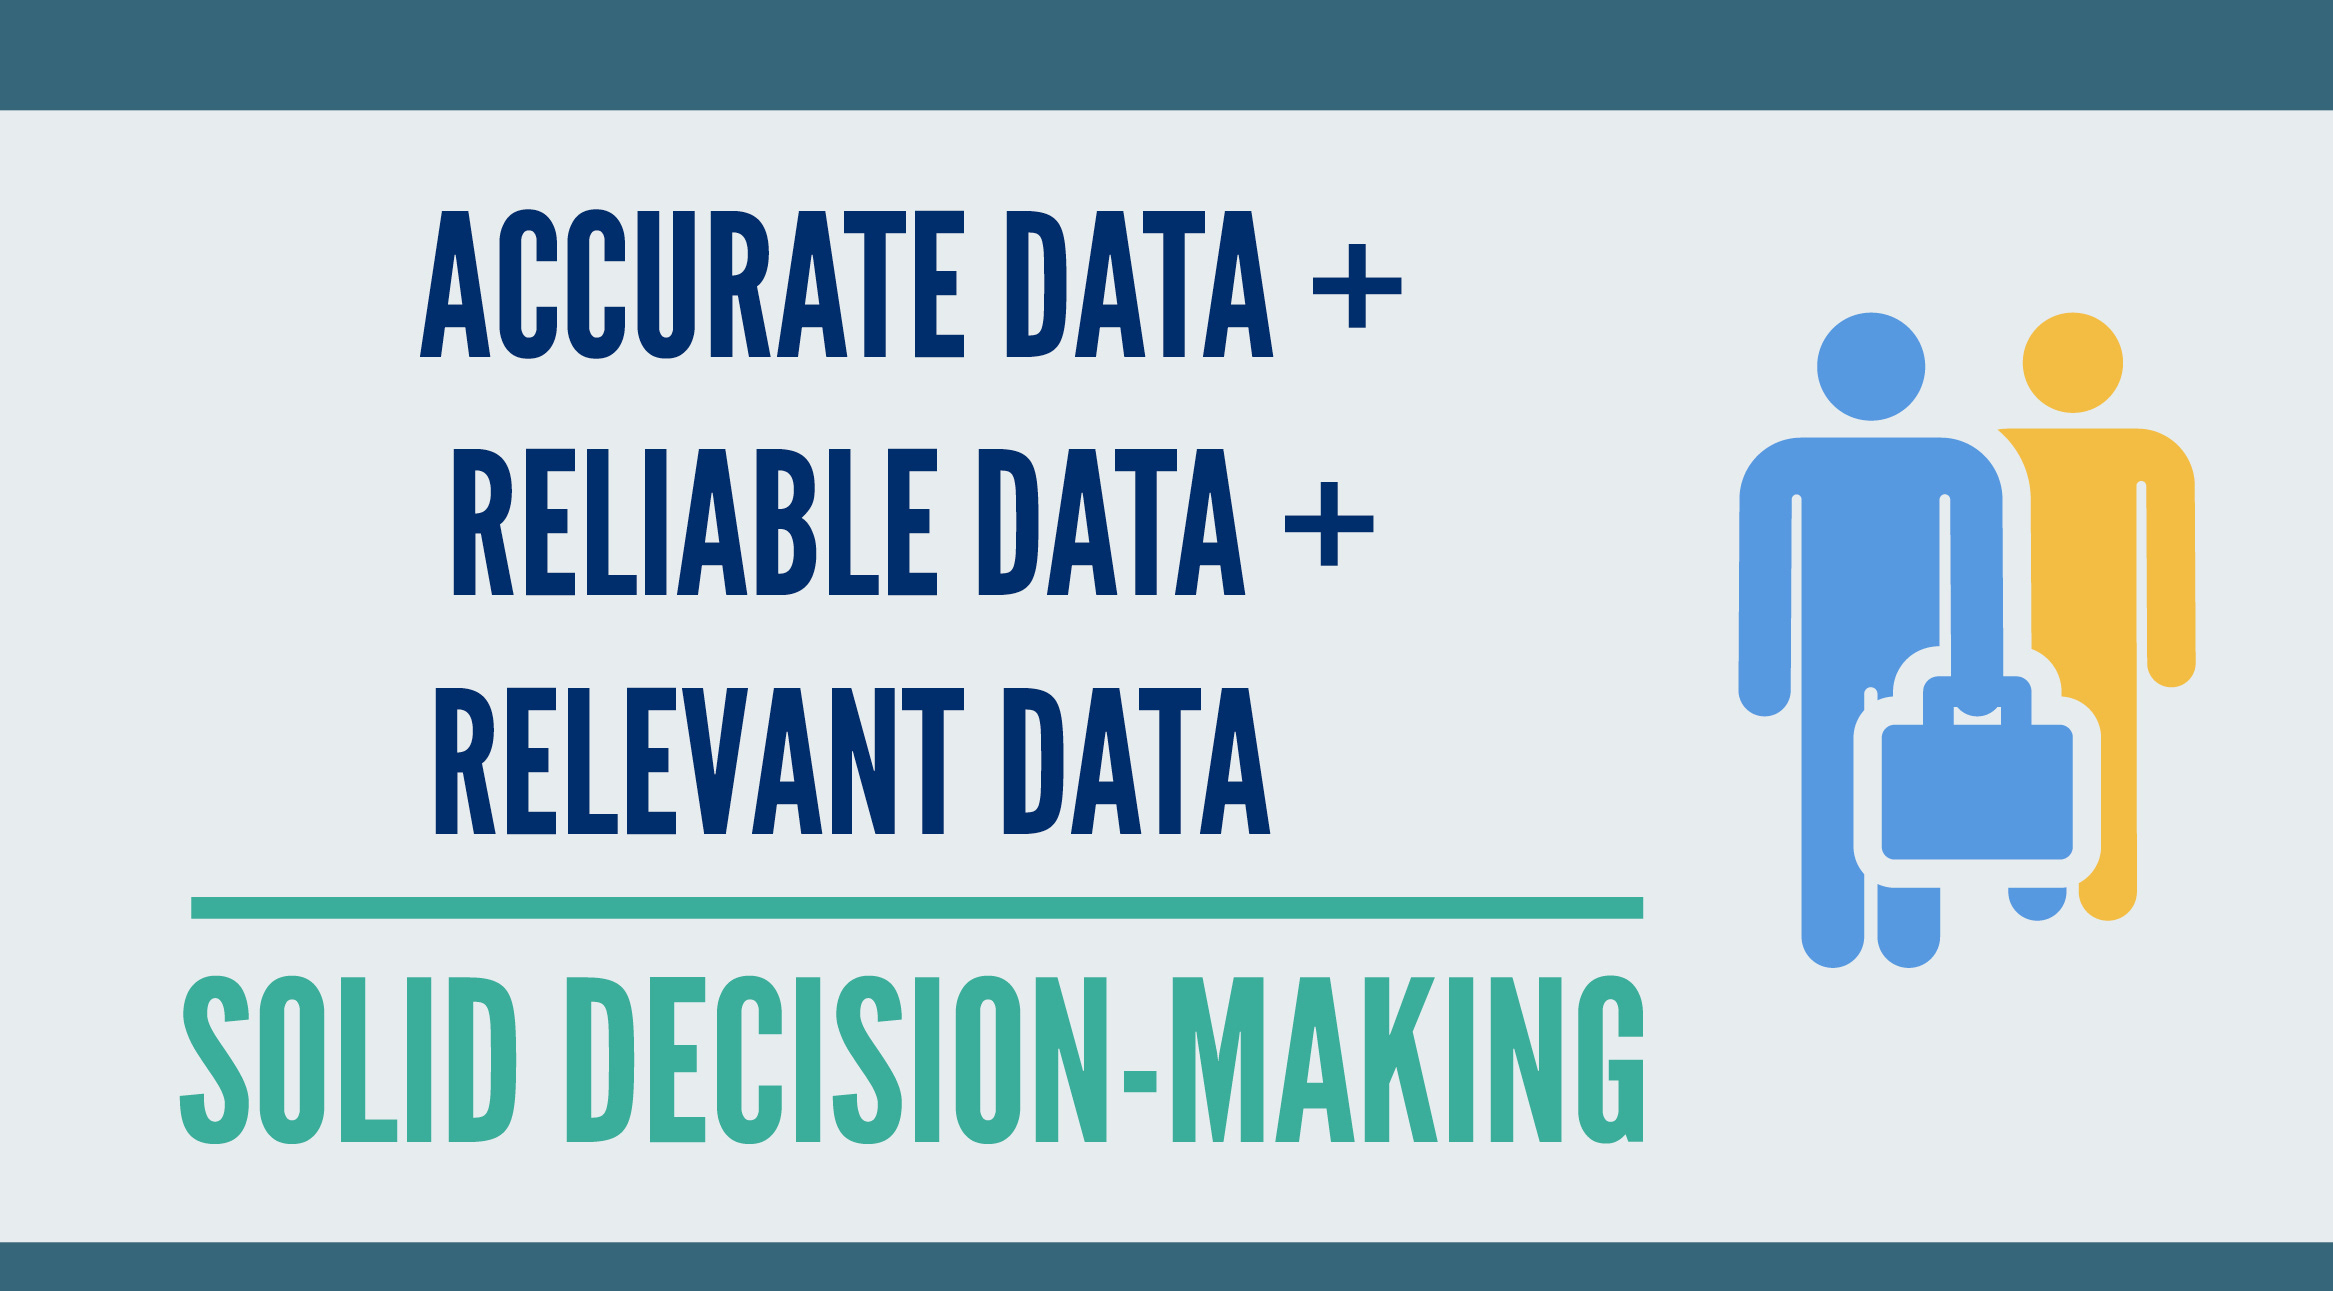 Accurate data + Reliable data + Relevant data = Solid decision-making